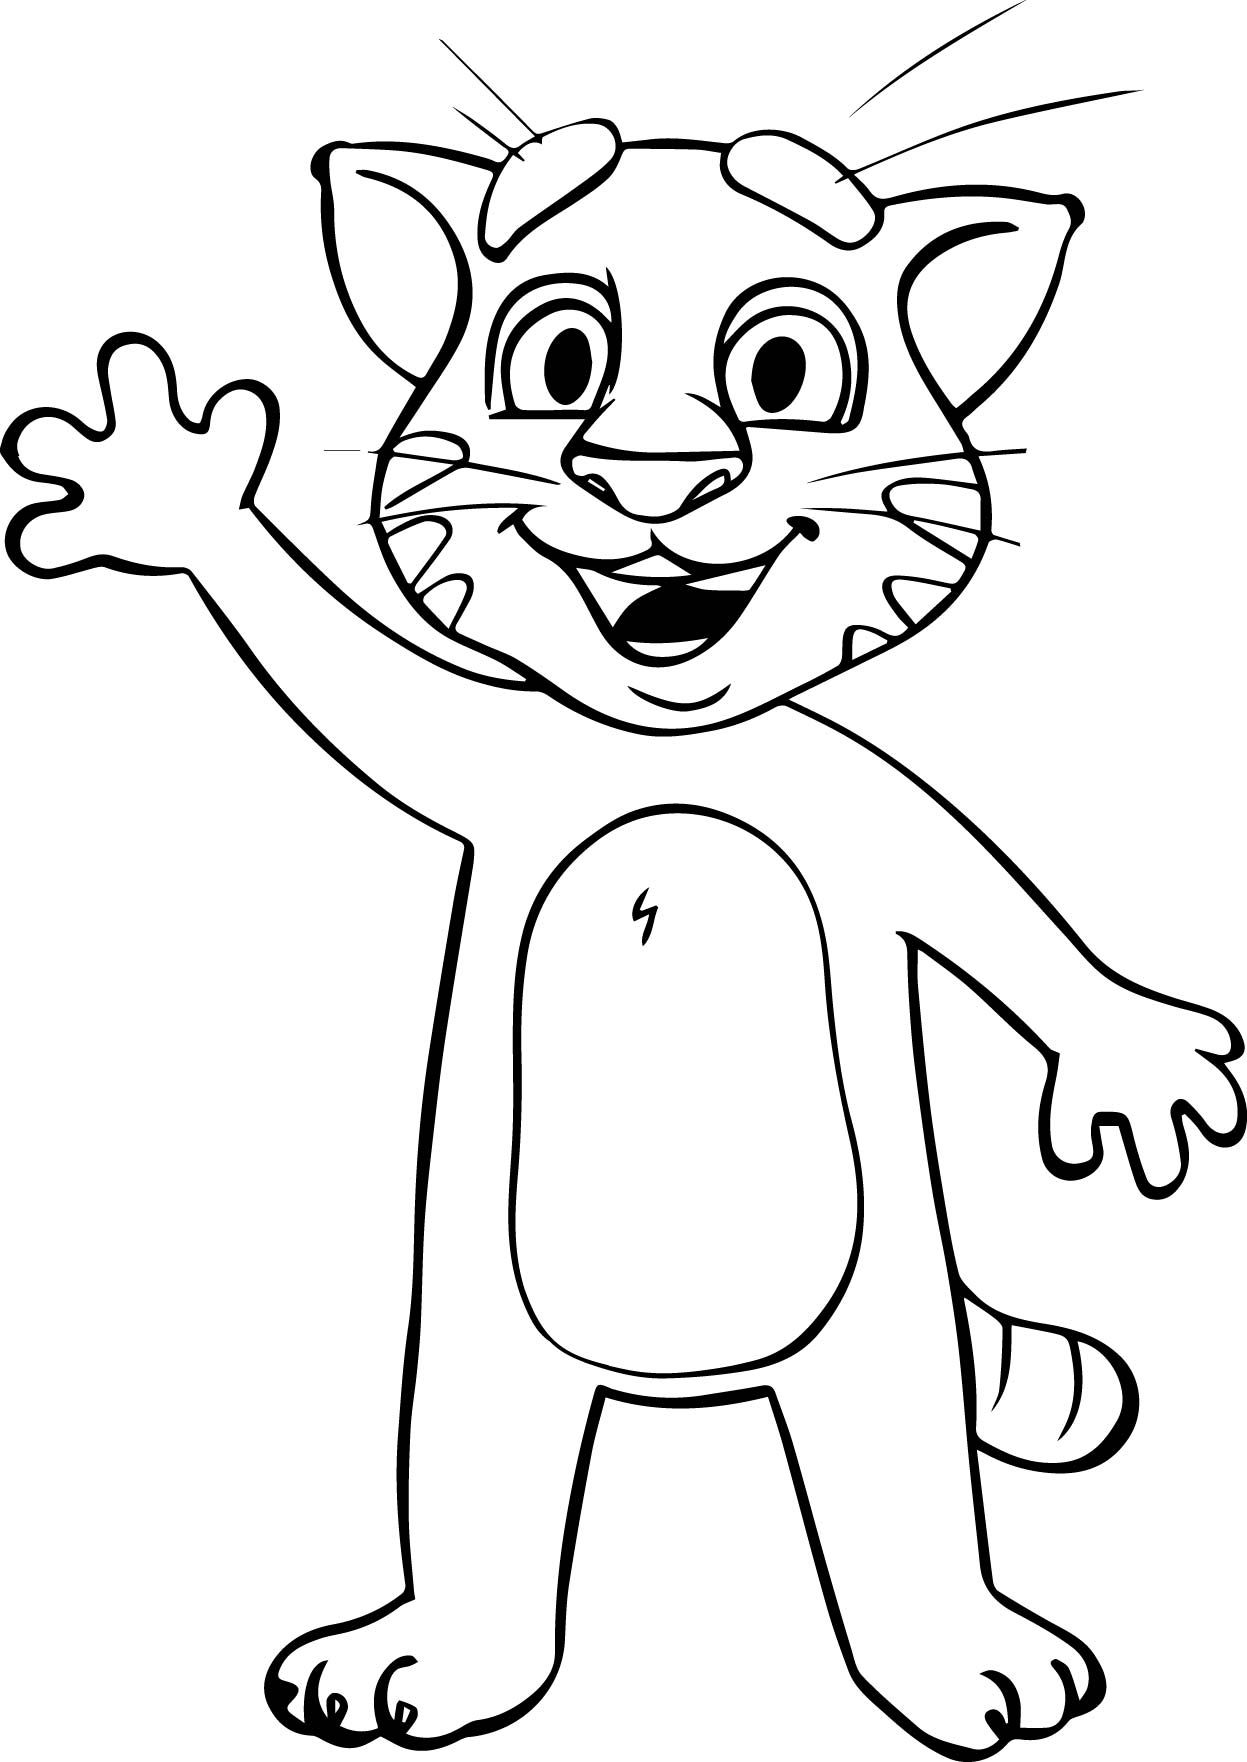 Talking Tom And Friends Coloring Pages.